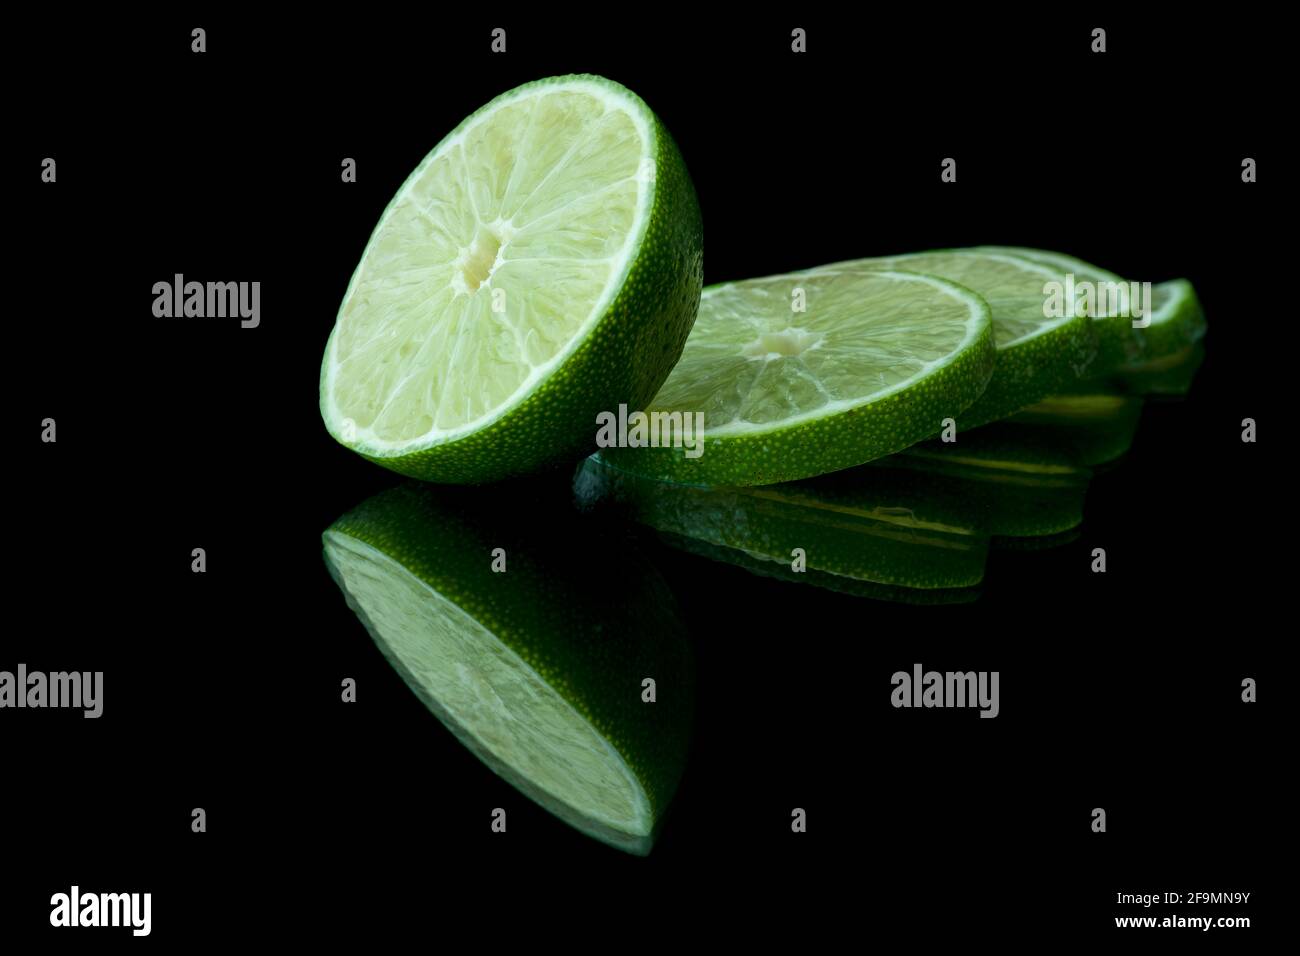 Image of lime with reflection on dark background Stock Photo